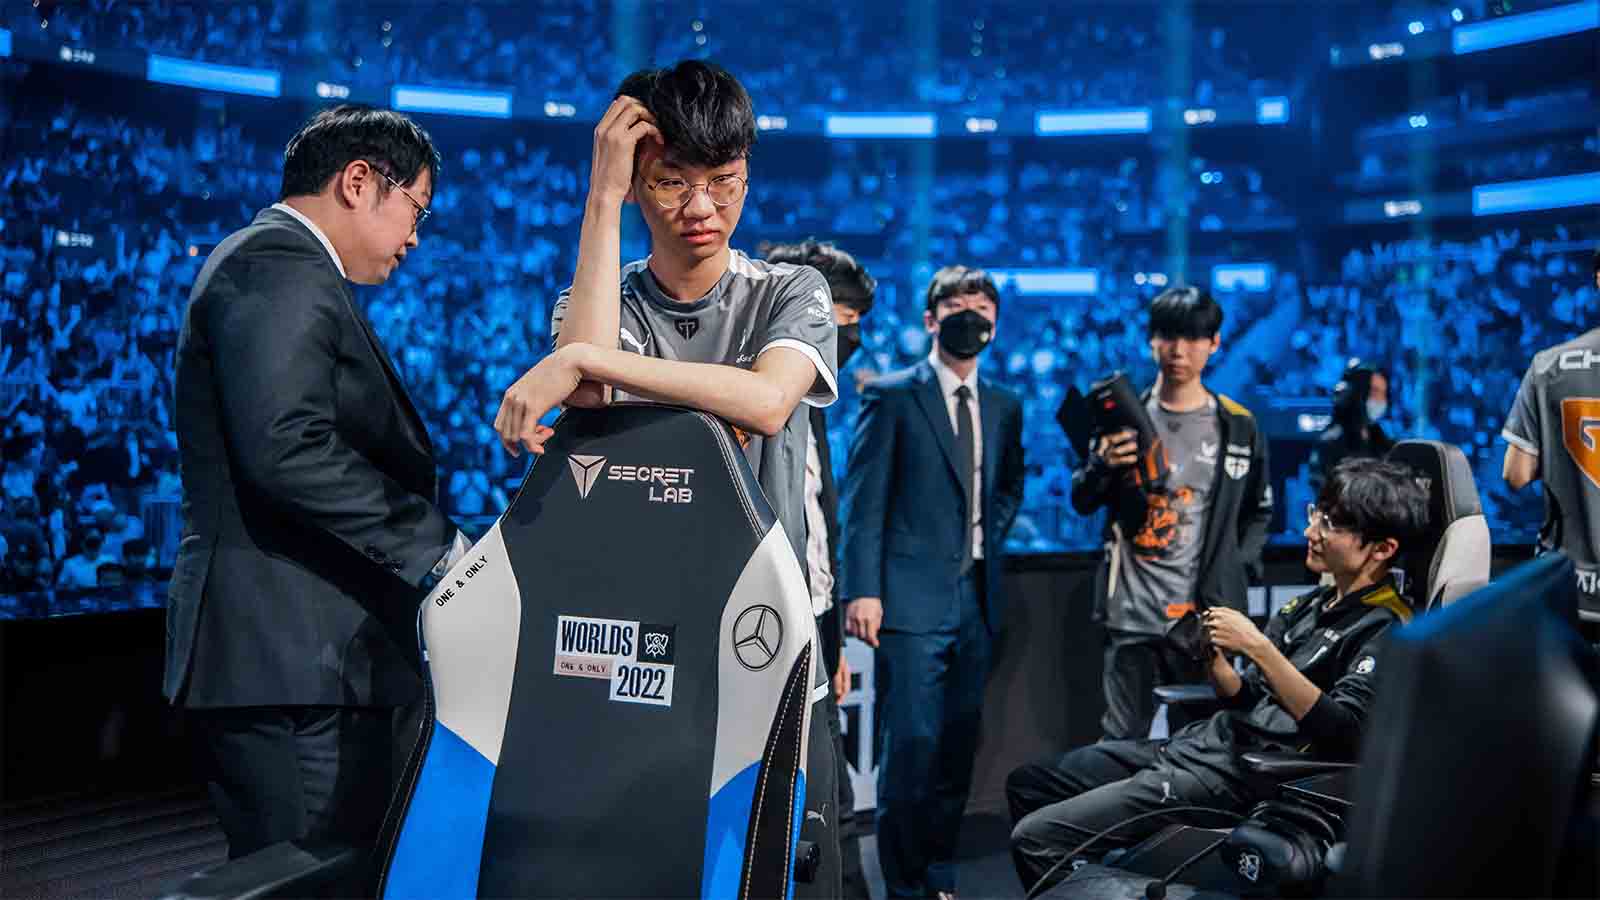 Worlds 2023 new path to qualify, new format fully explained